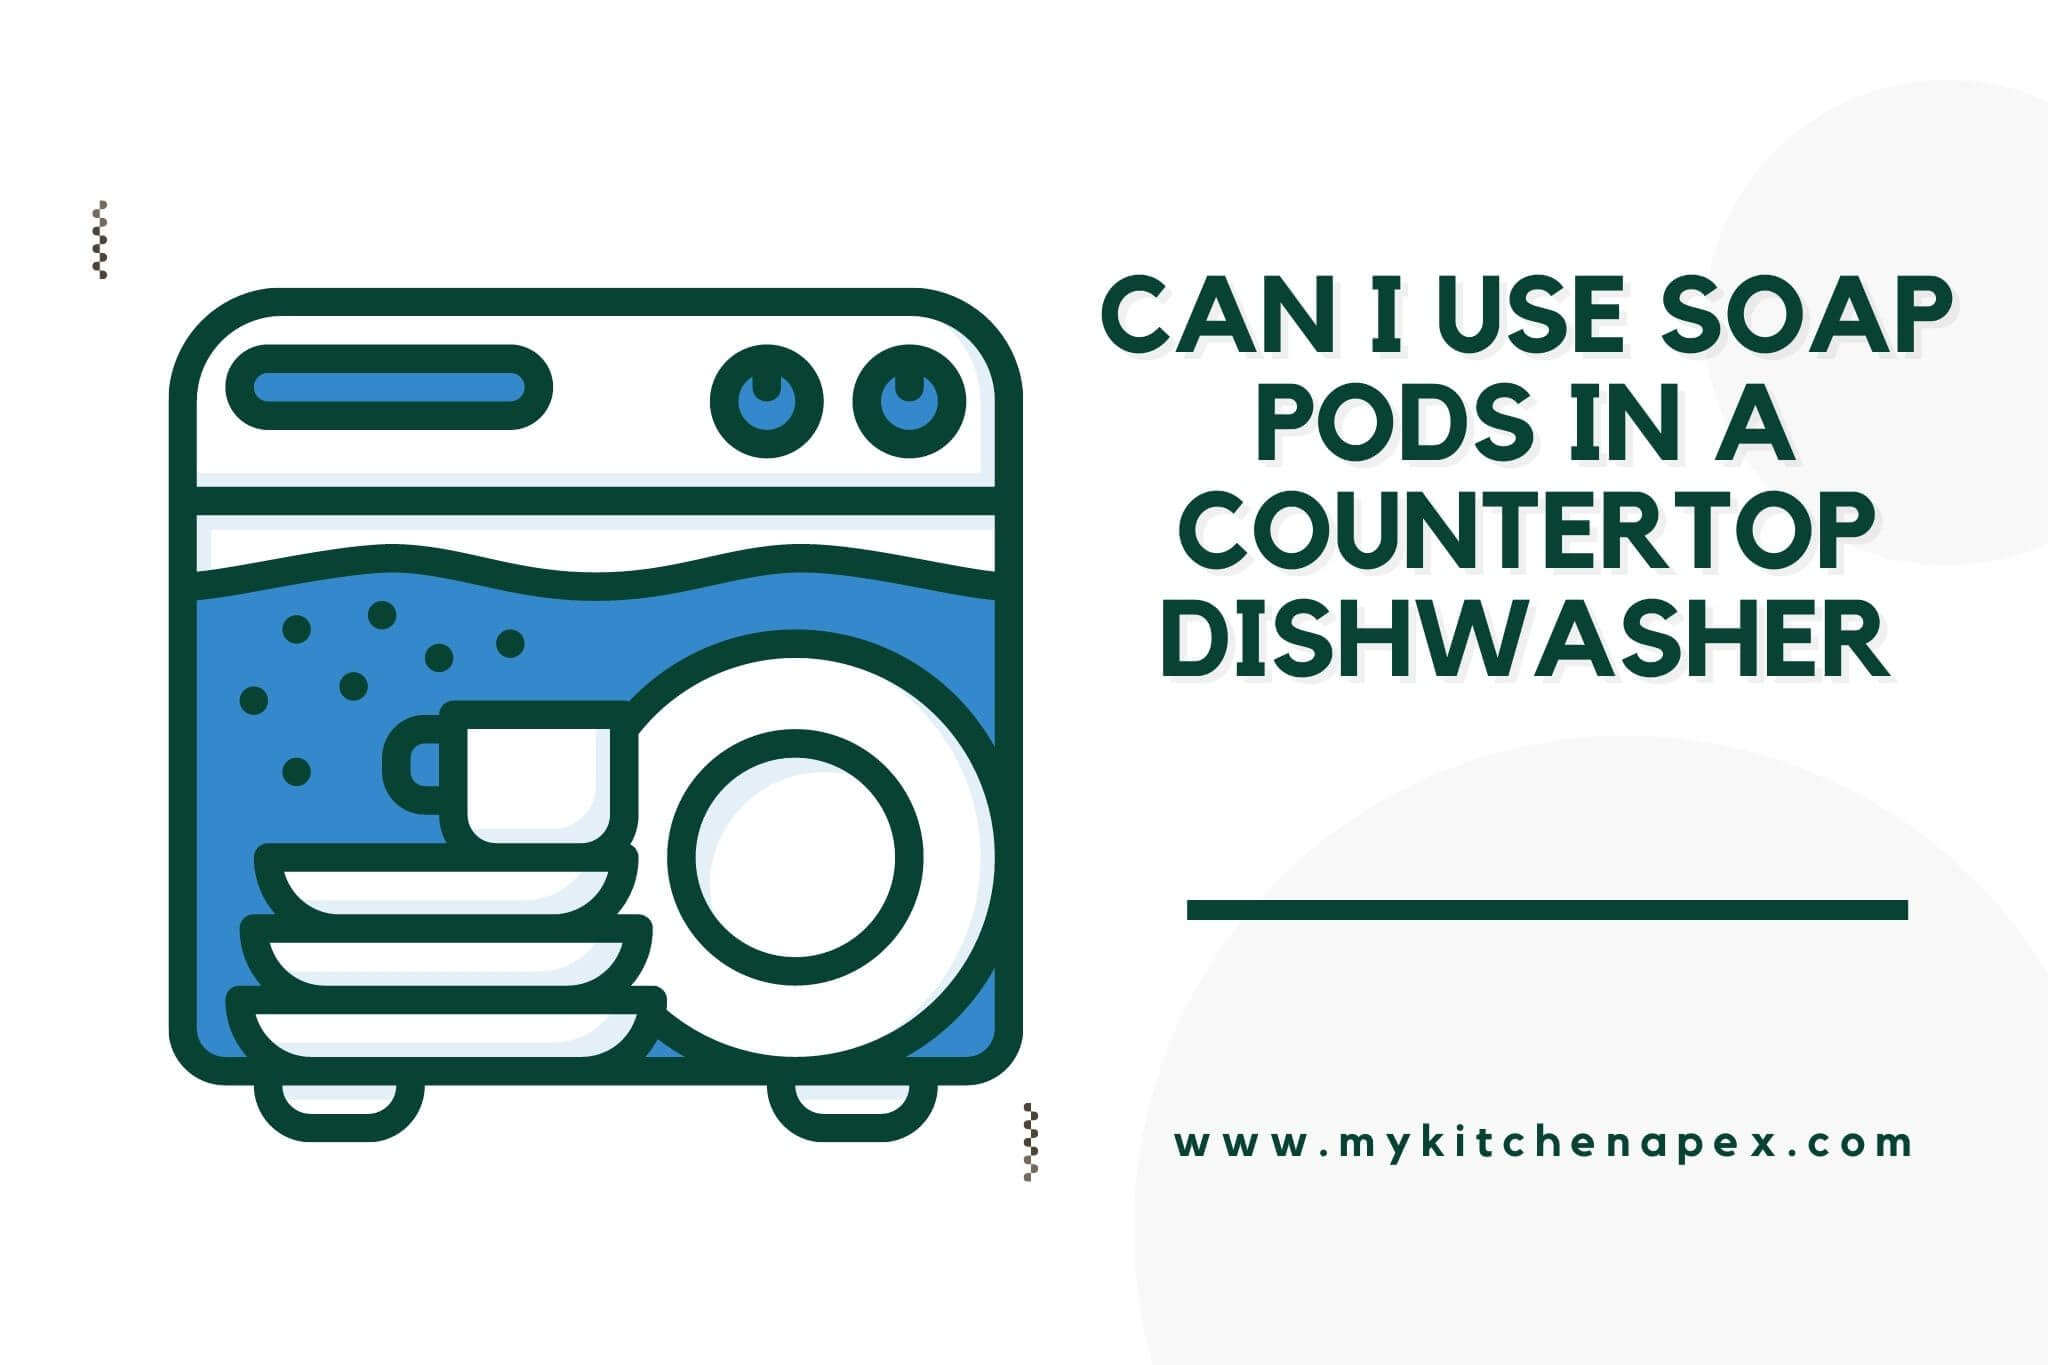 Can I Use Soap Pods in a Countertop Dishwasher